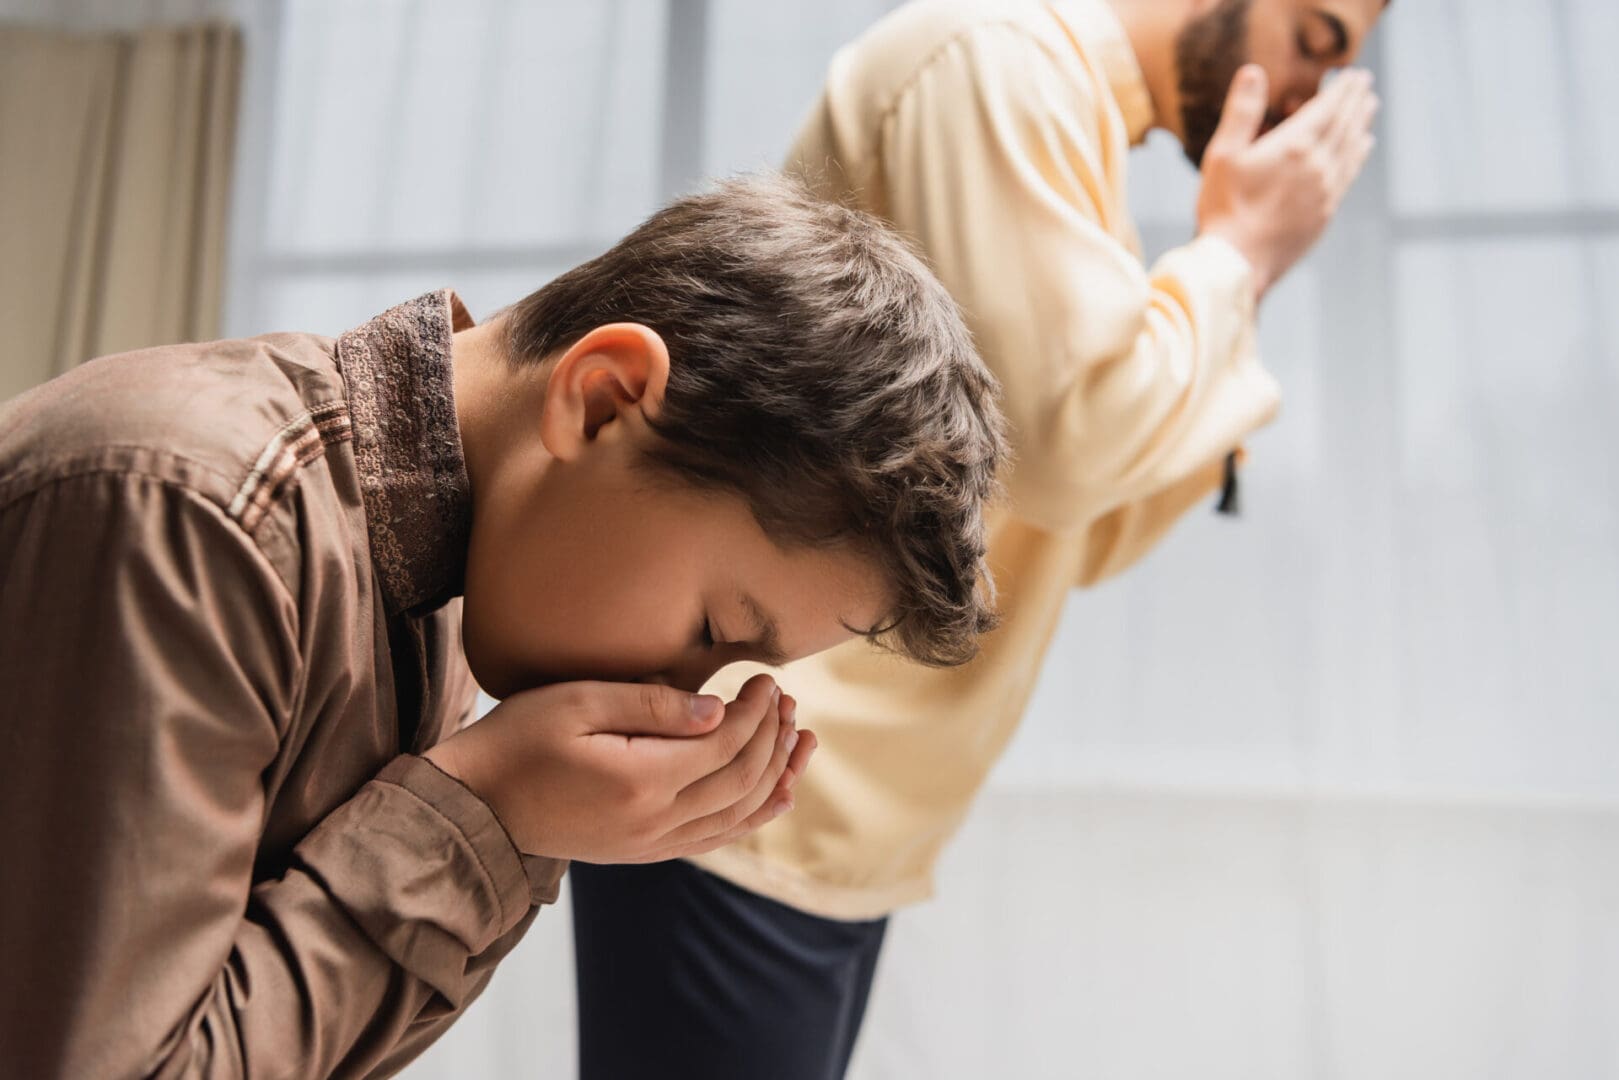 Young boy sneezing into tissue with another person standing in the background during Ramadan.